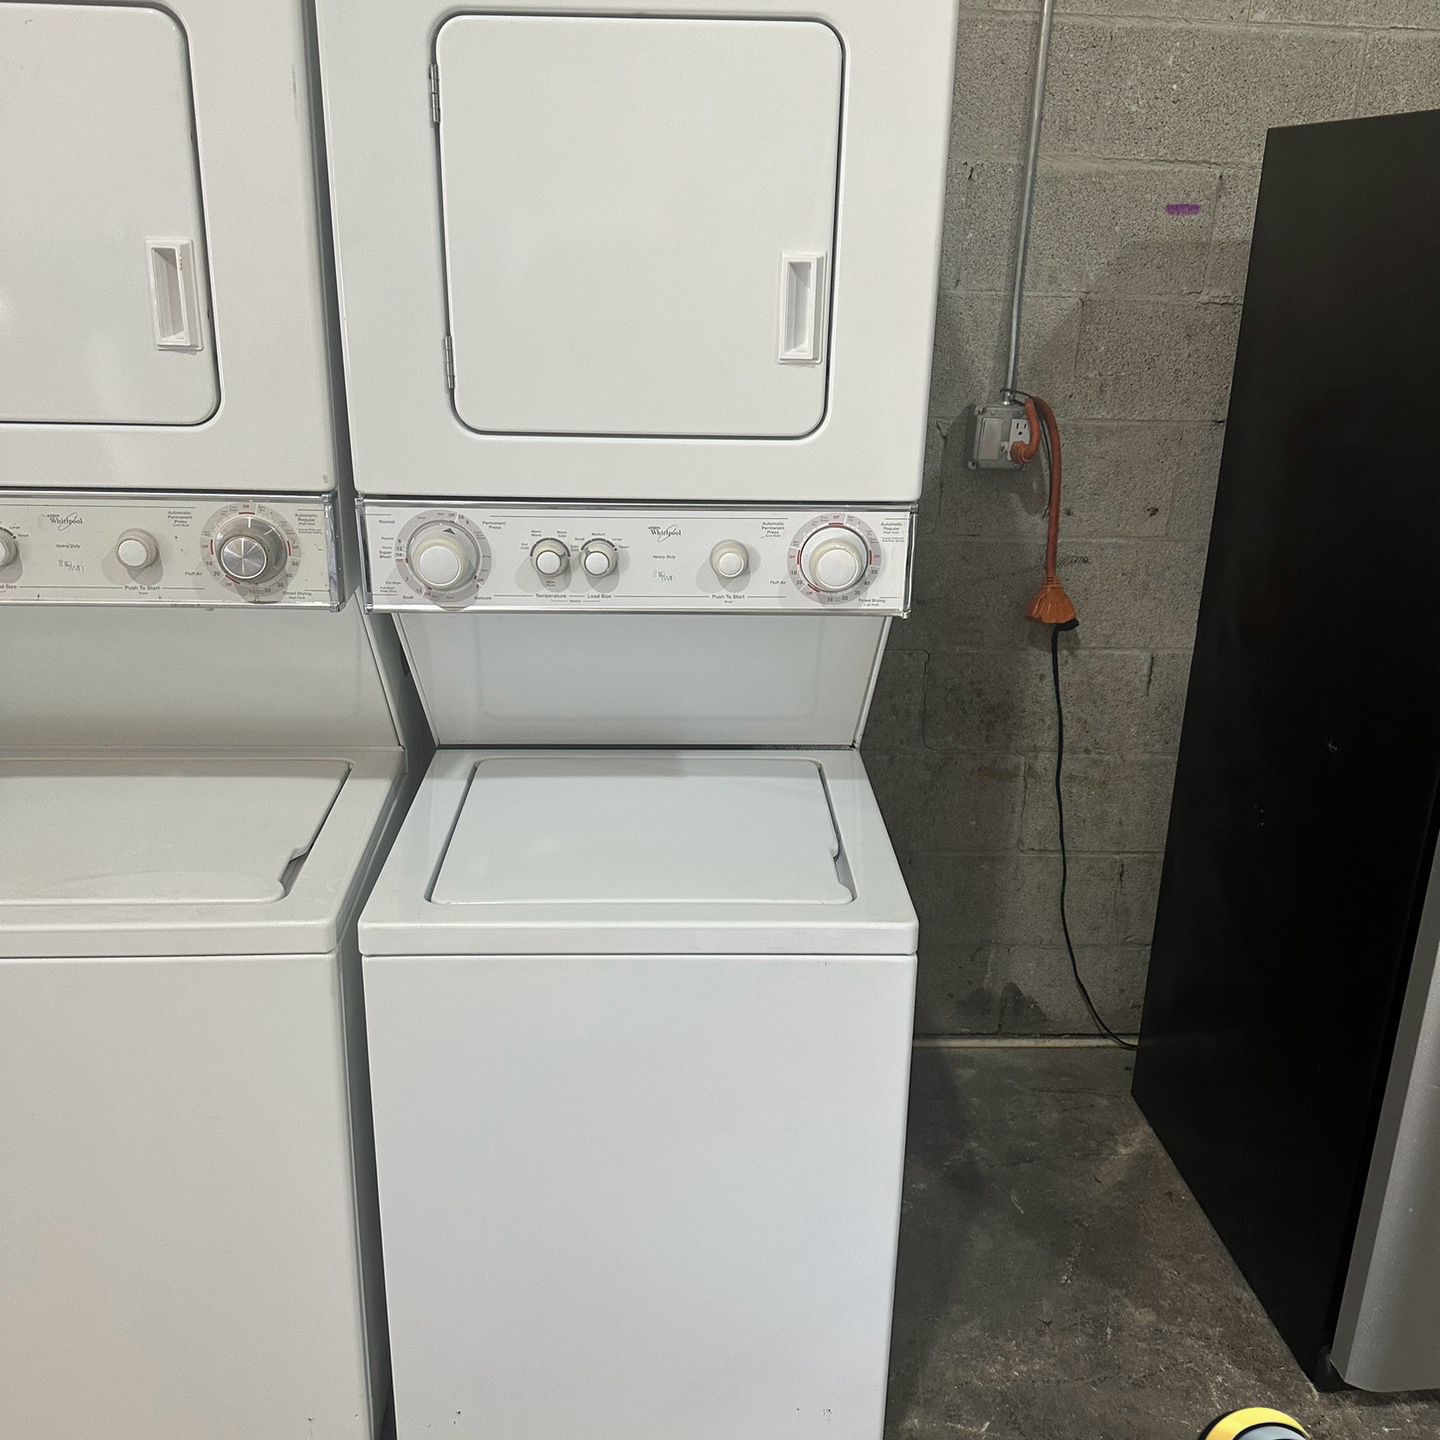 Whirlpool Combo 24”W ( Washer And Dryer) 🚨$300 For PICKUP 🚨$350 For DELIVERY🚨